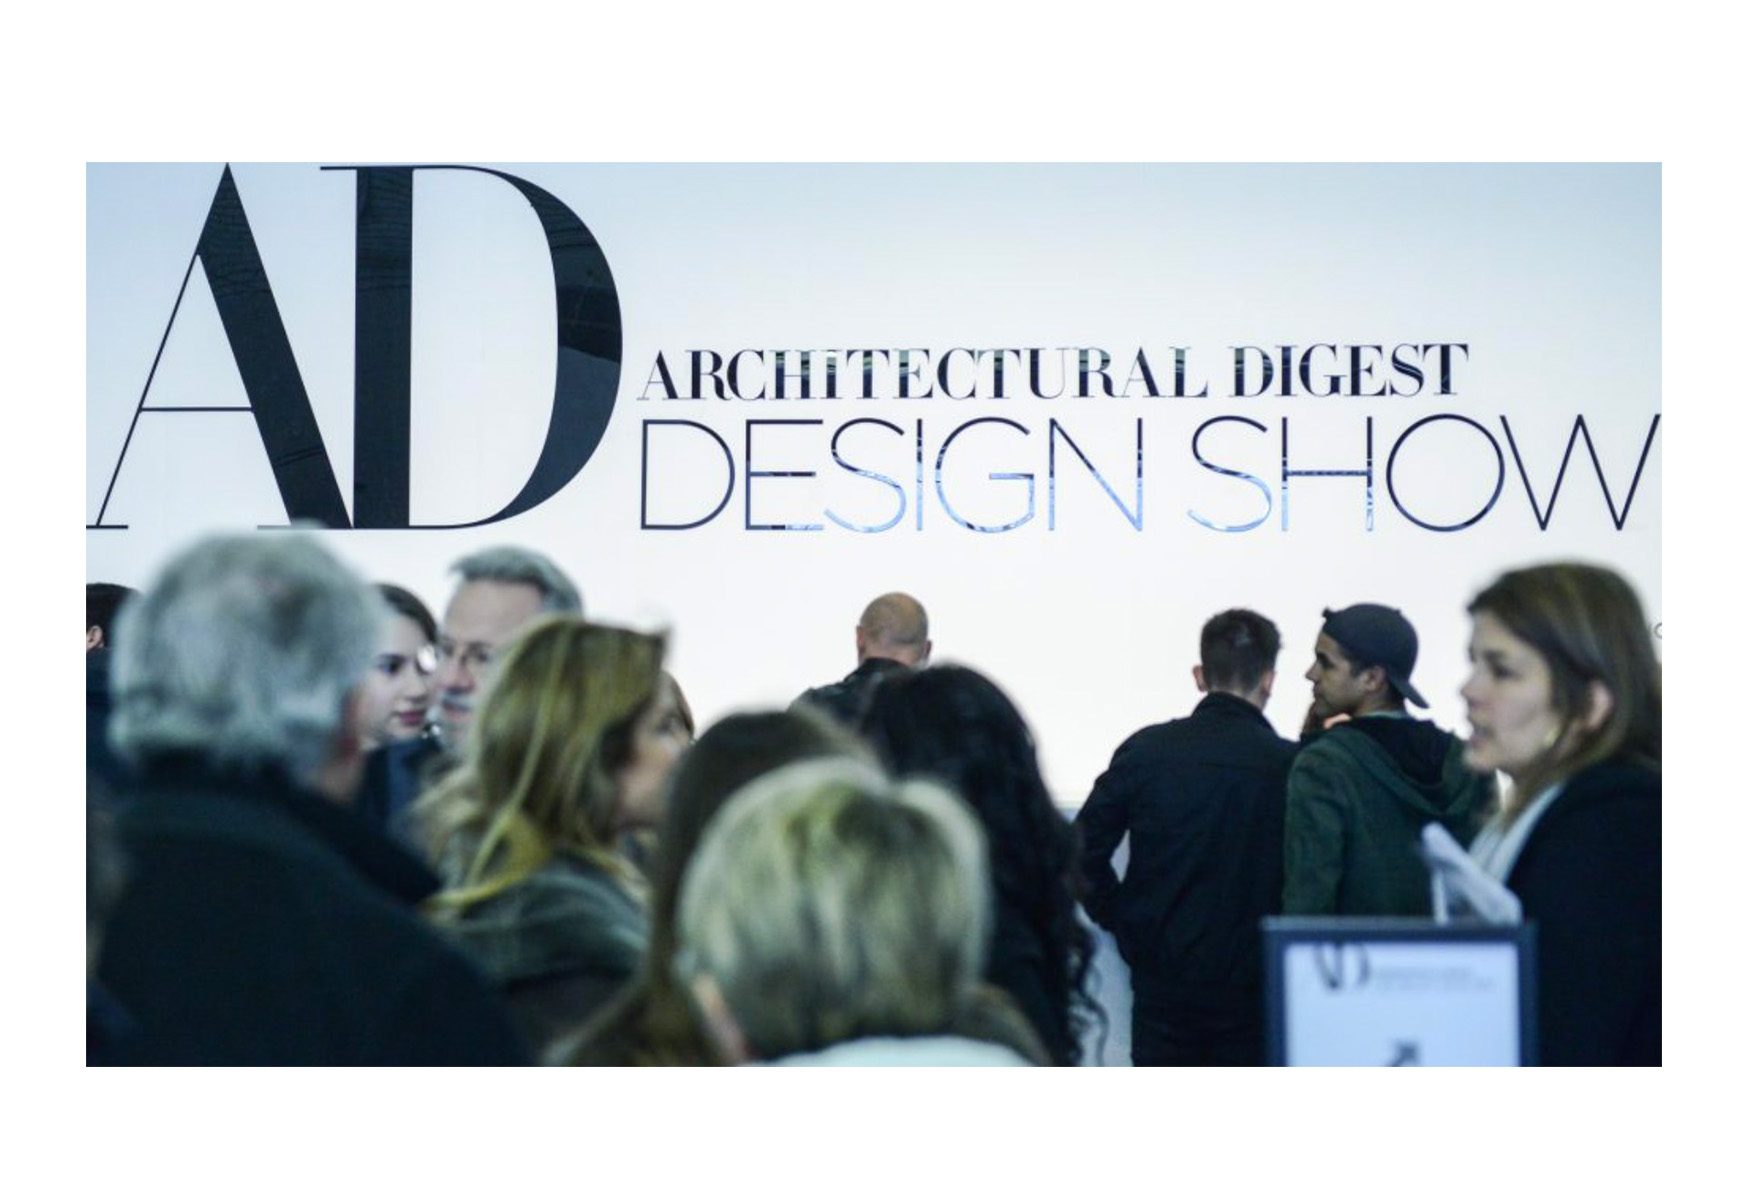 Architectual Digest Design Show, March, 2021, NY